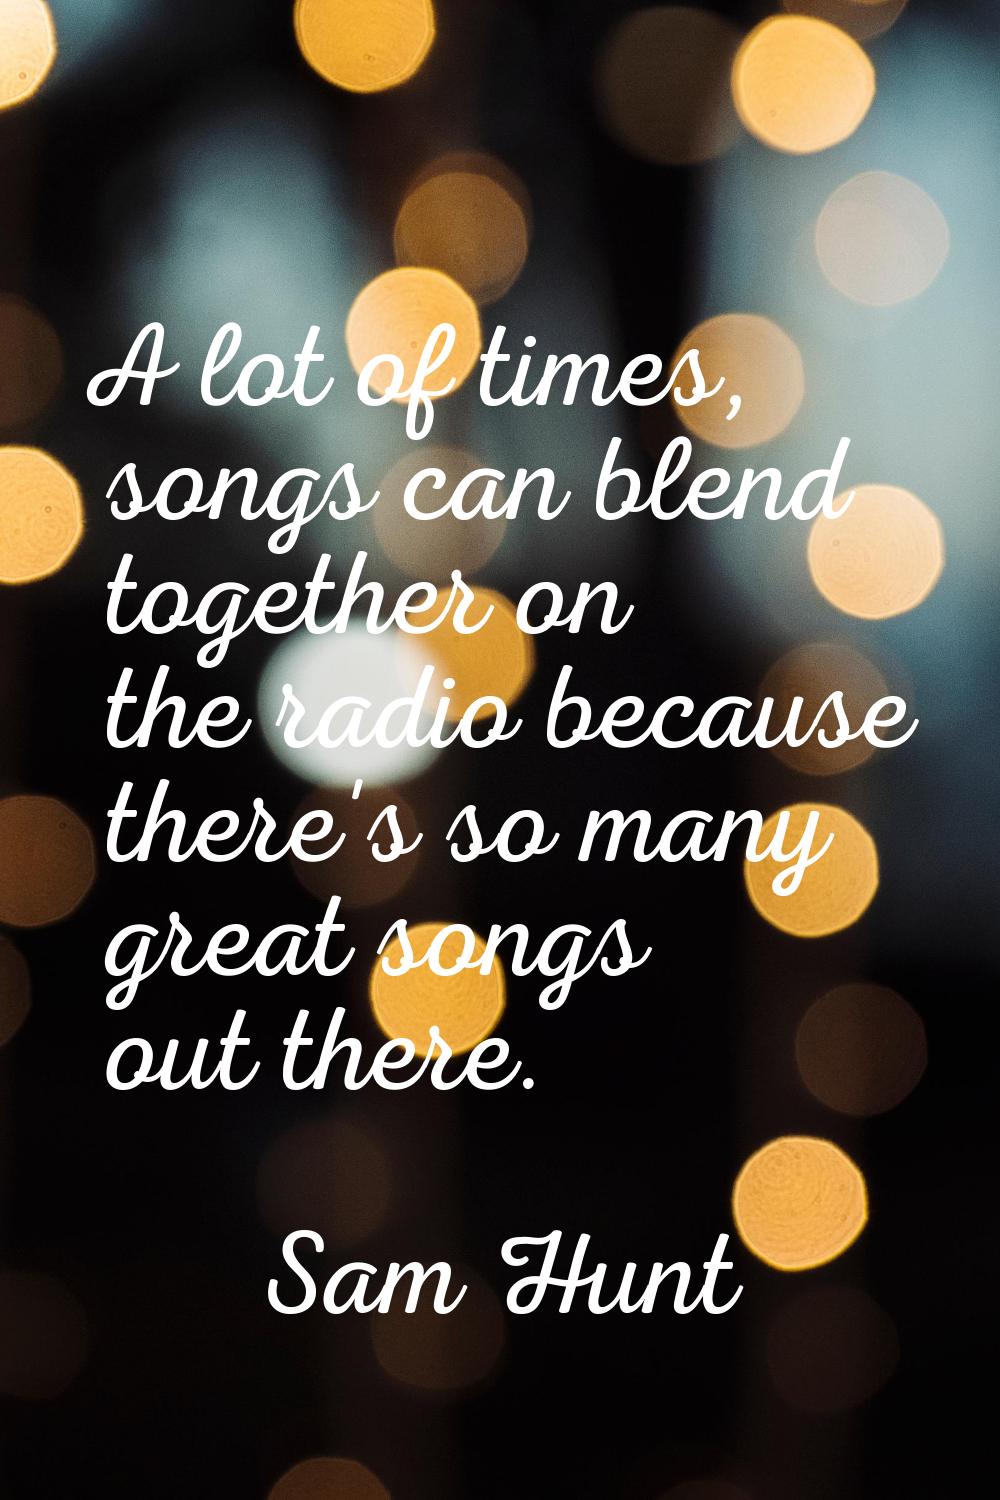 A lot of times, songs can blend together on the radio because there's so many great songs out there